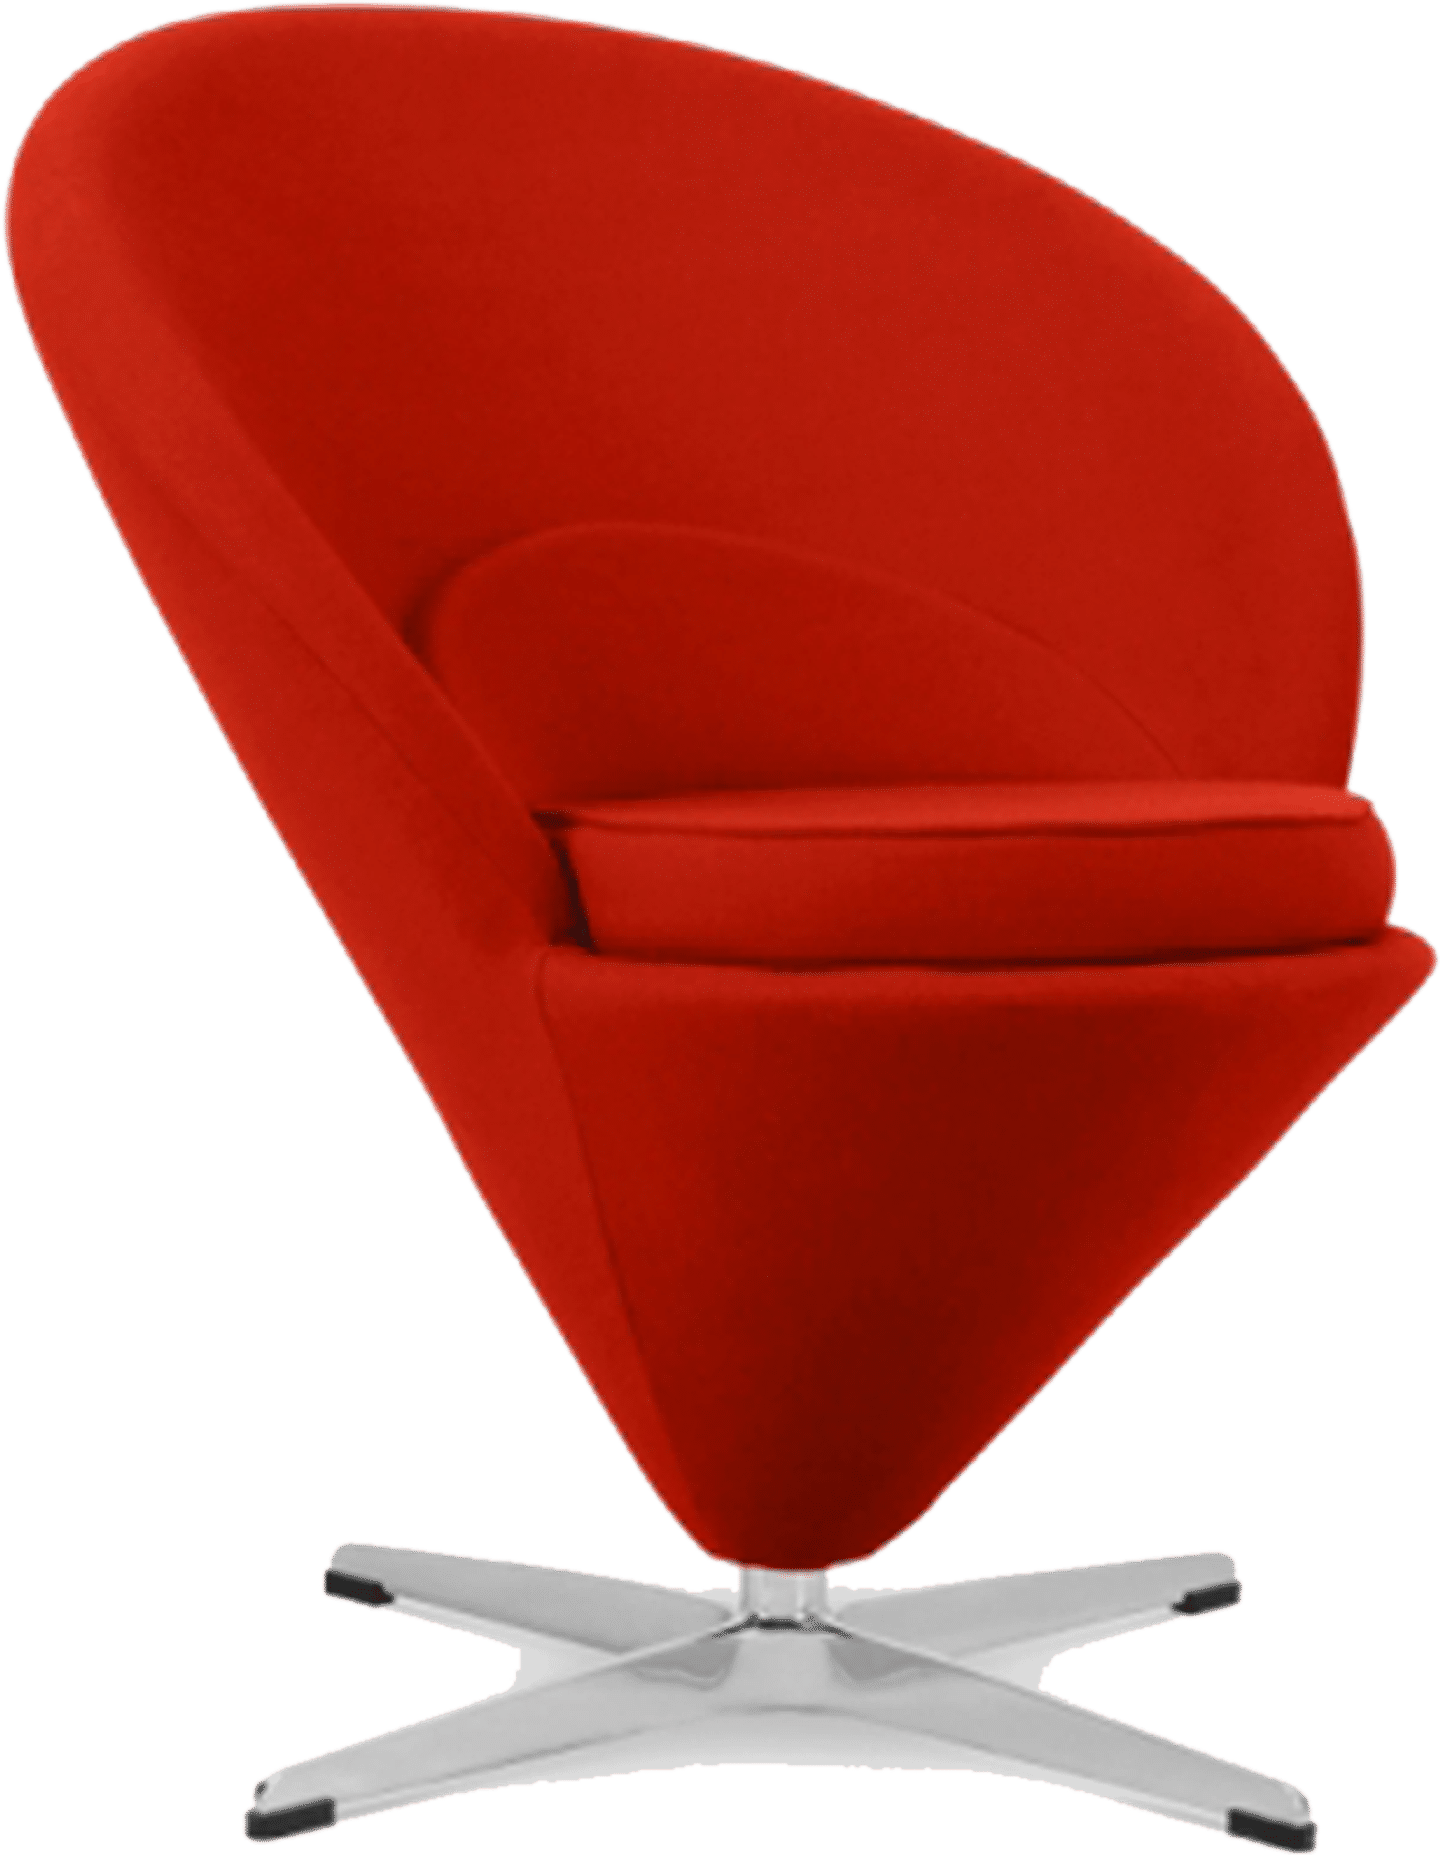 Cone Chair Deep Red image.